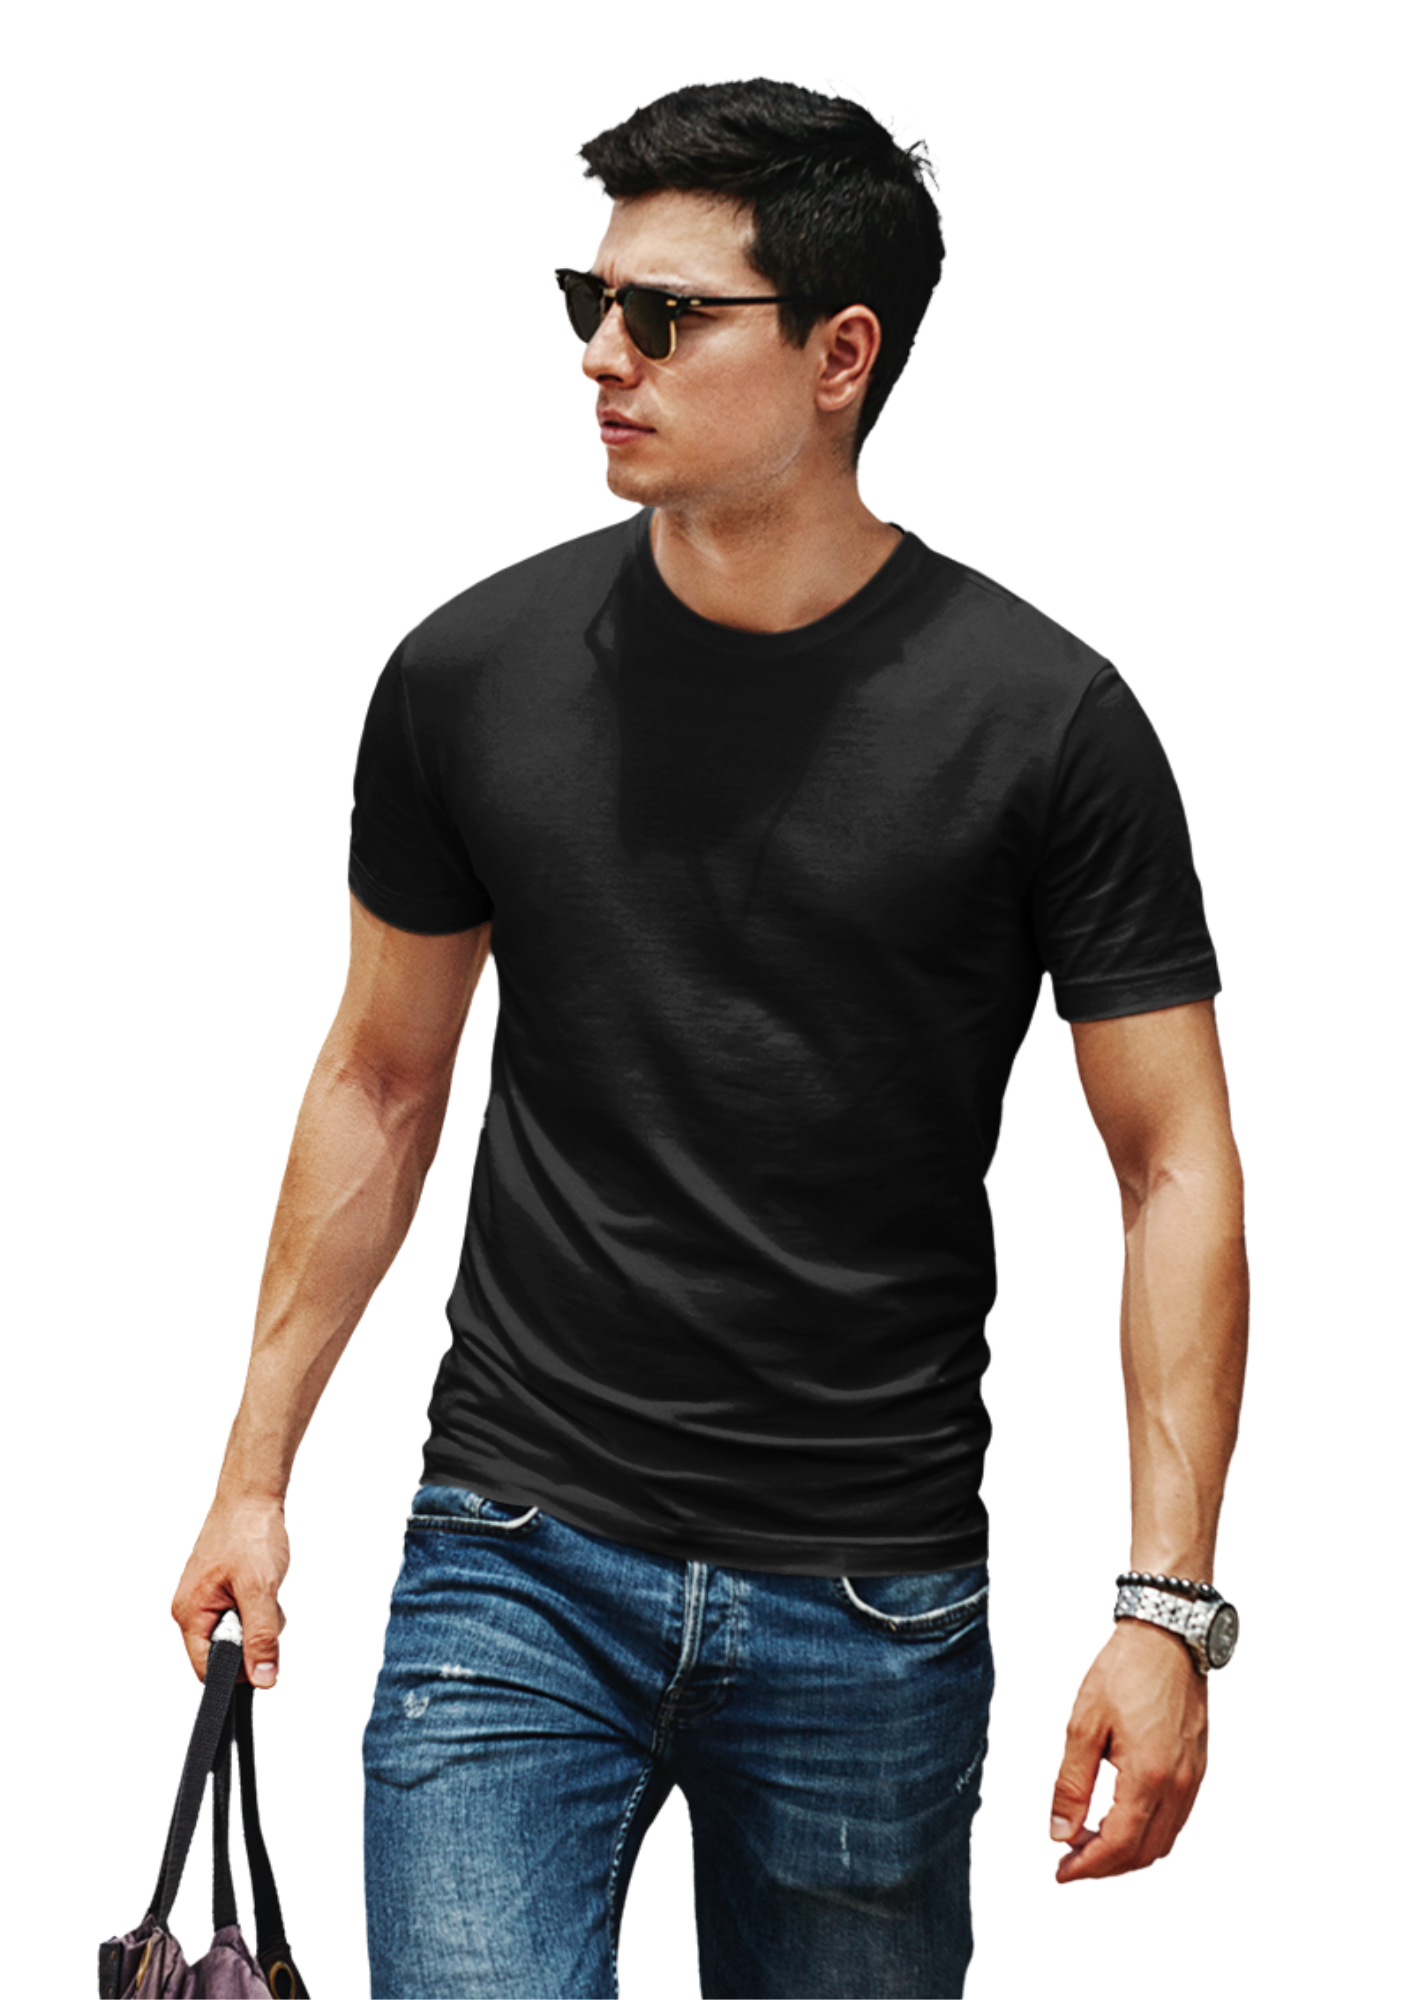 100% Compacted Combed Cotton Black, Black, Black 3 T-shirts